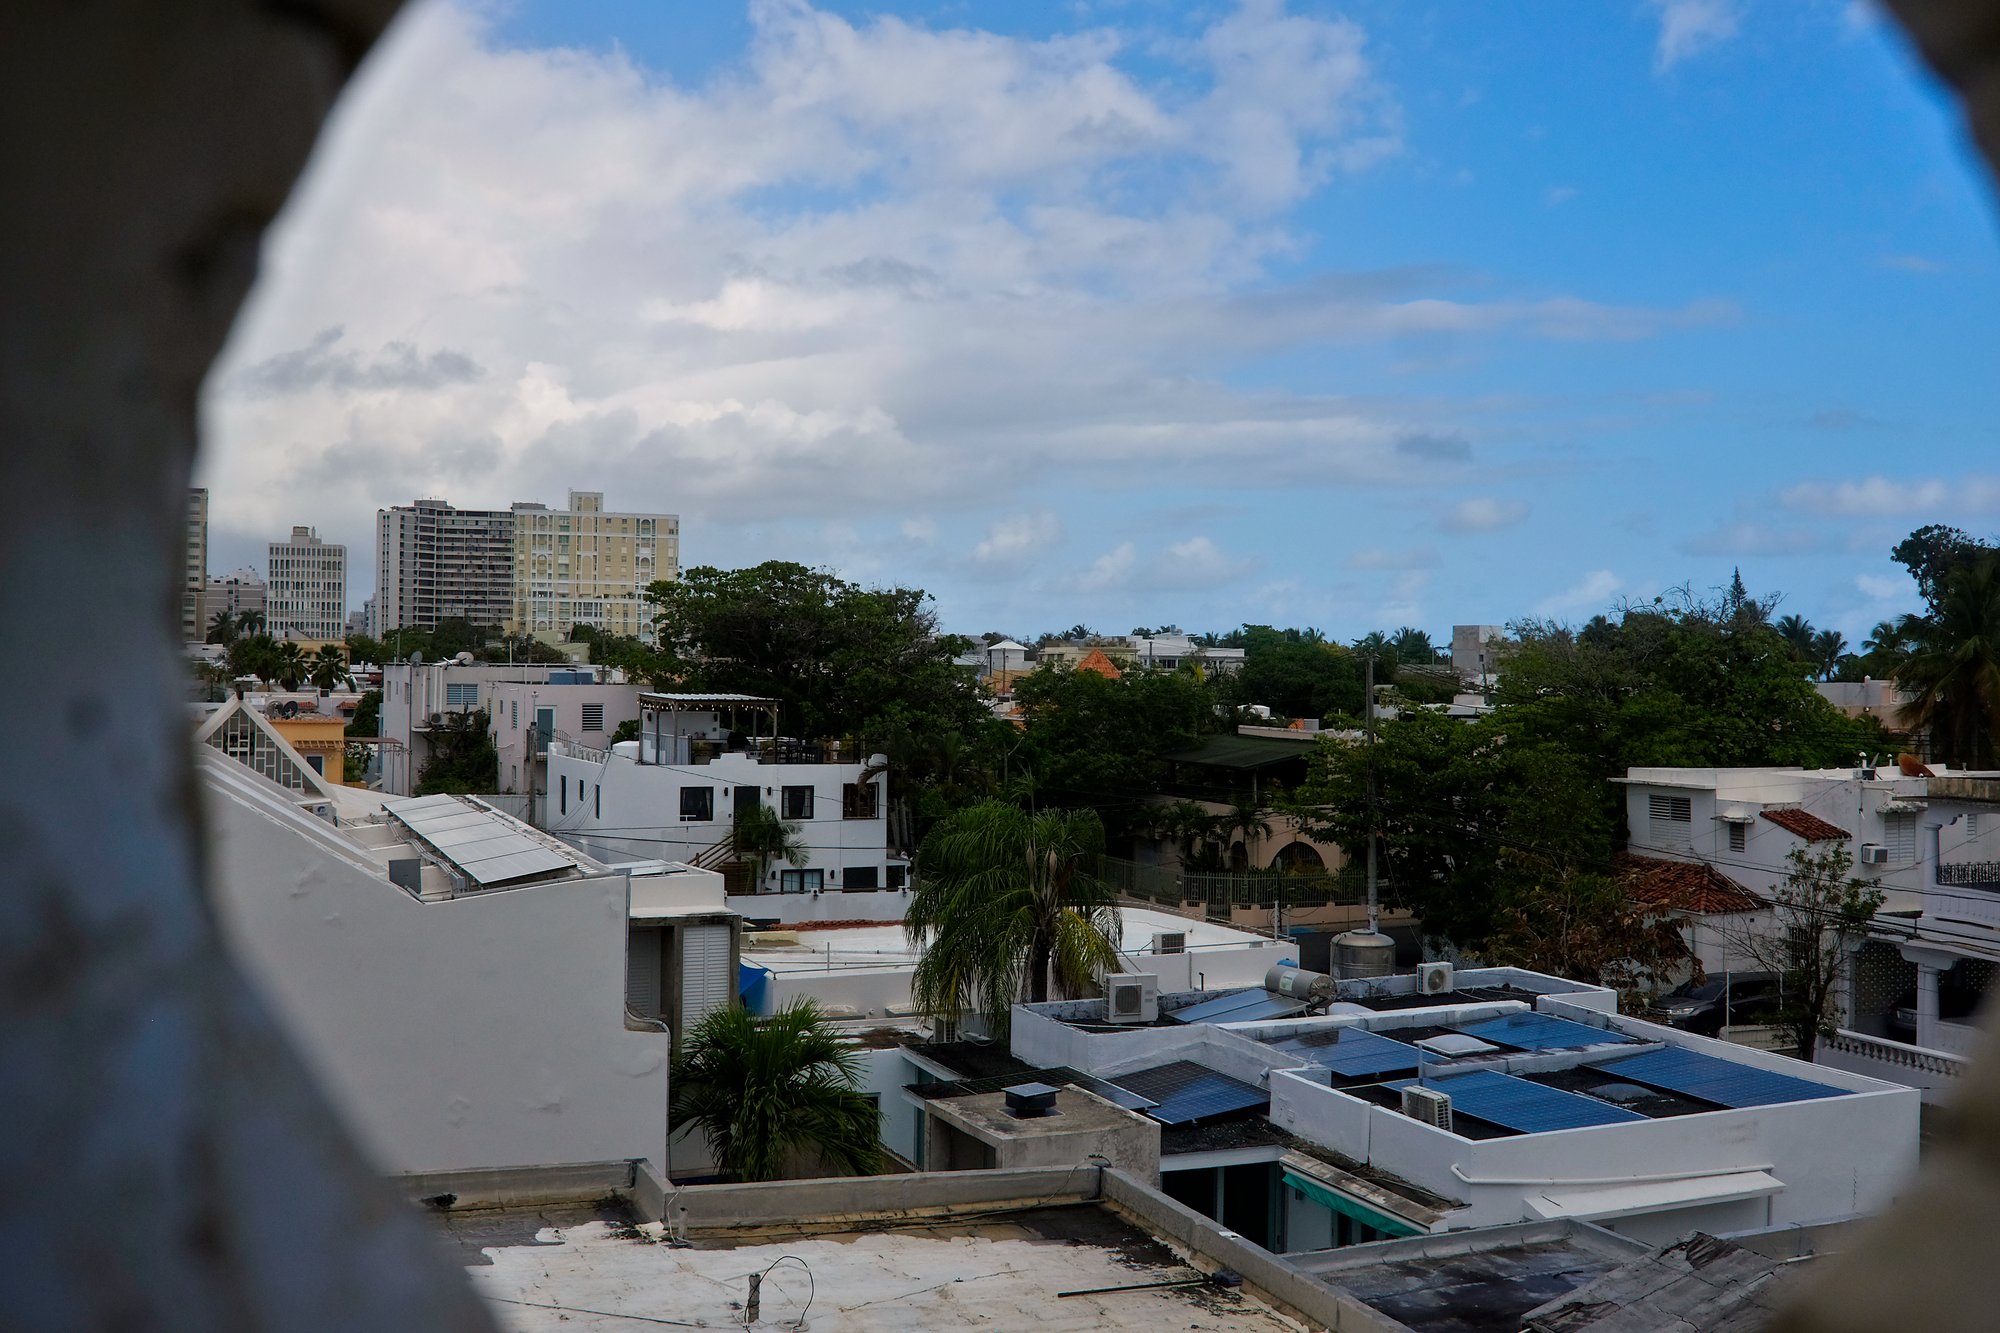 View of Santurce from the roof of Dream Inn